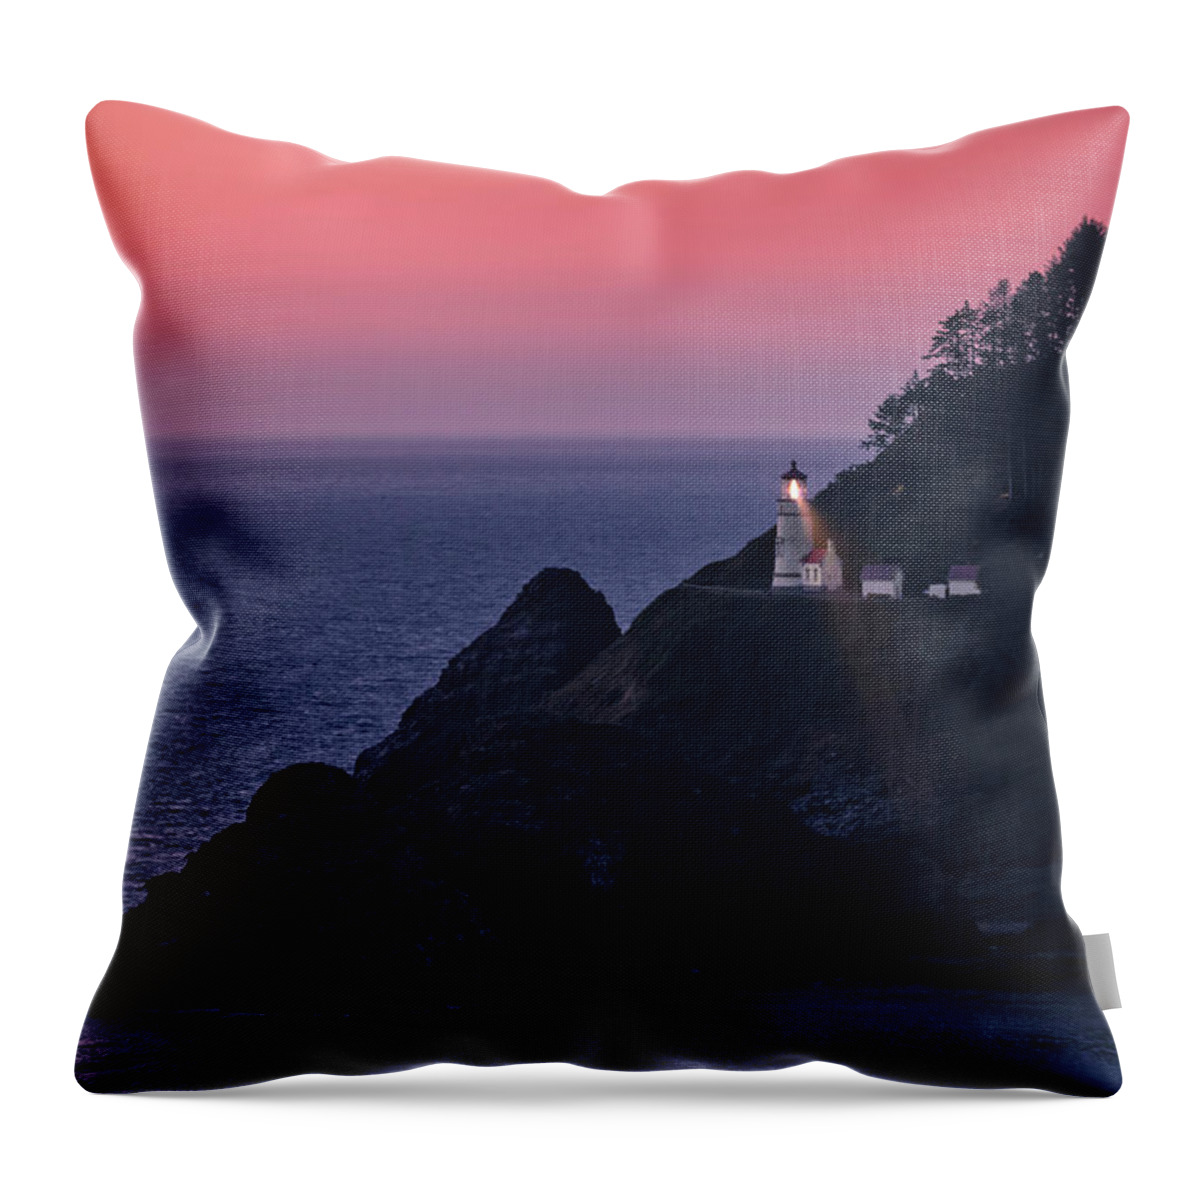 Heceta Head Lighthouse Sunset Throw Pillow featuring the photograph Heceta Head Lighthouse Sunset by Wes and Dotty Weber